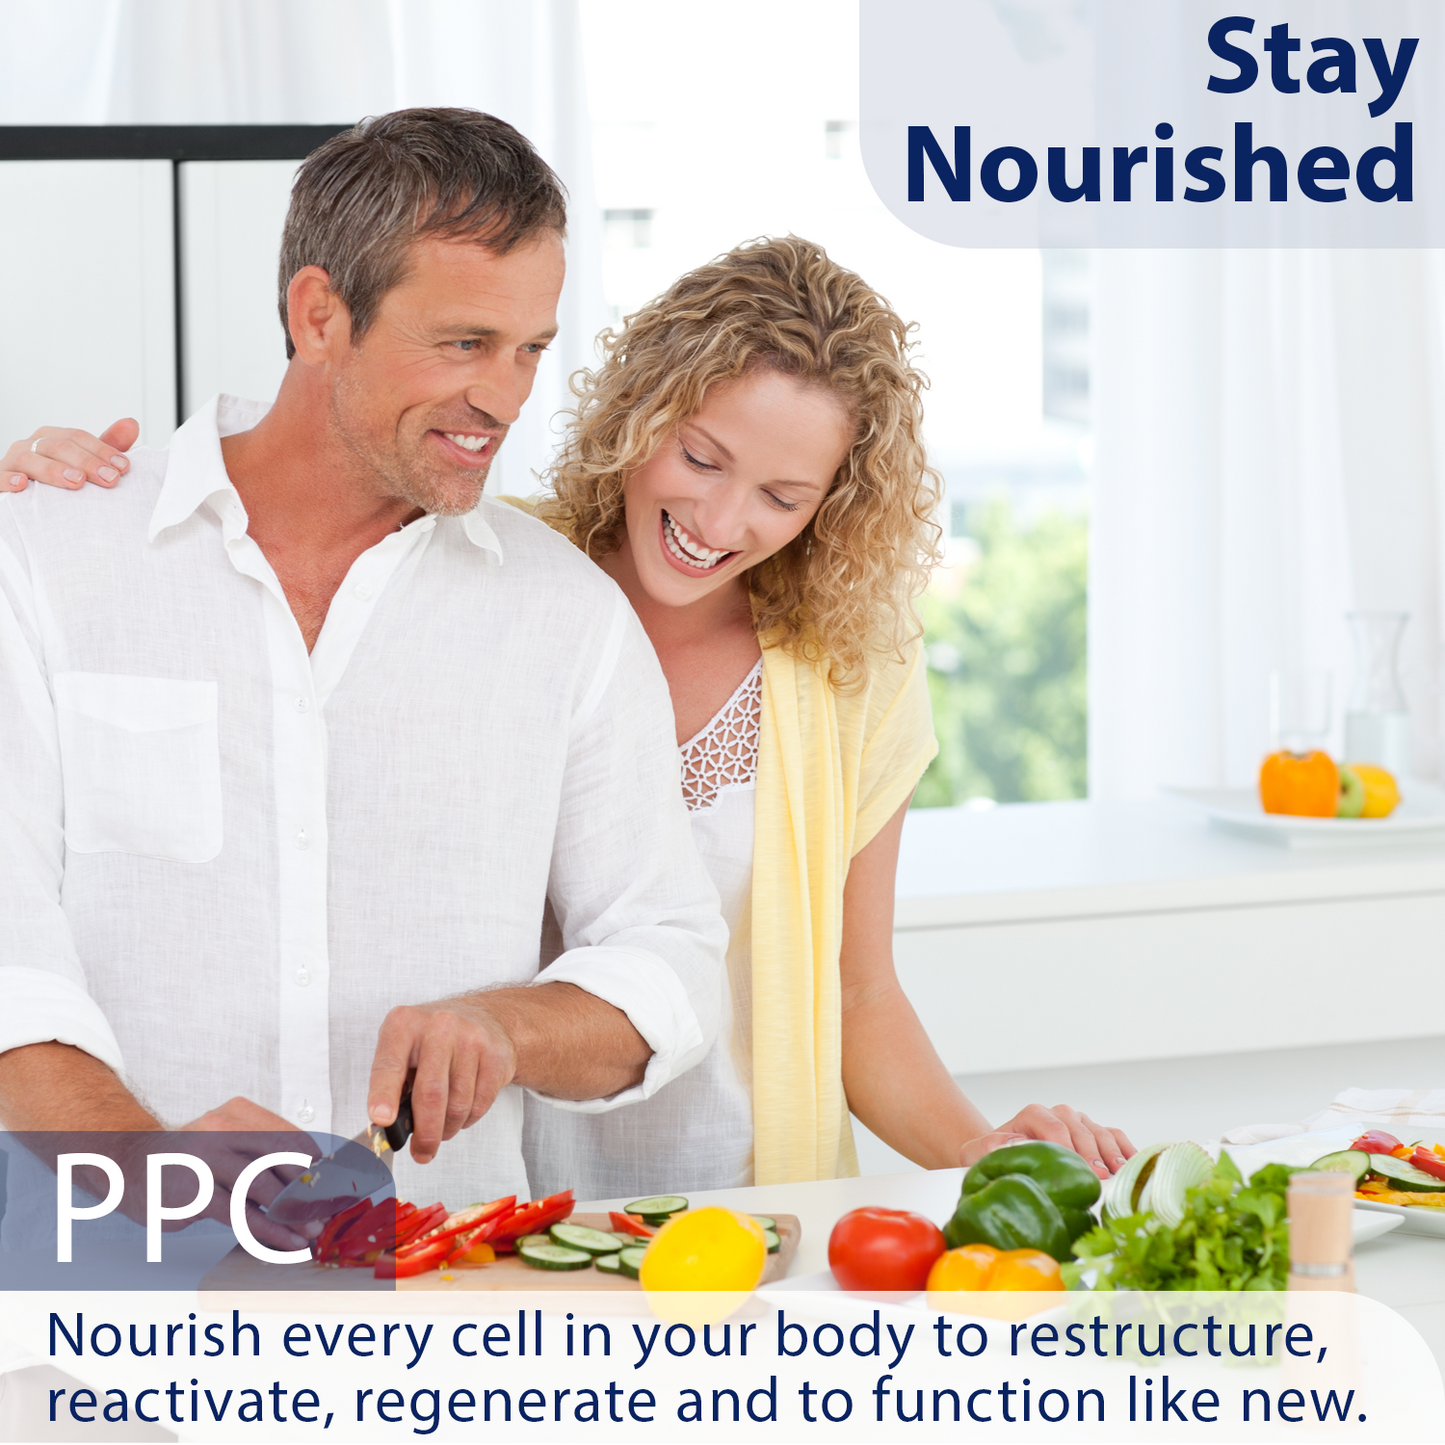 PhosChol PPC is a superior cell membrane therapeutic that supports Liver, Brain, Gut, Heart, Blood Vessels, cell metabolism, detox and more.